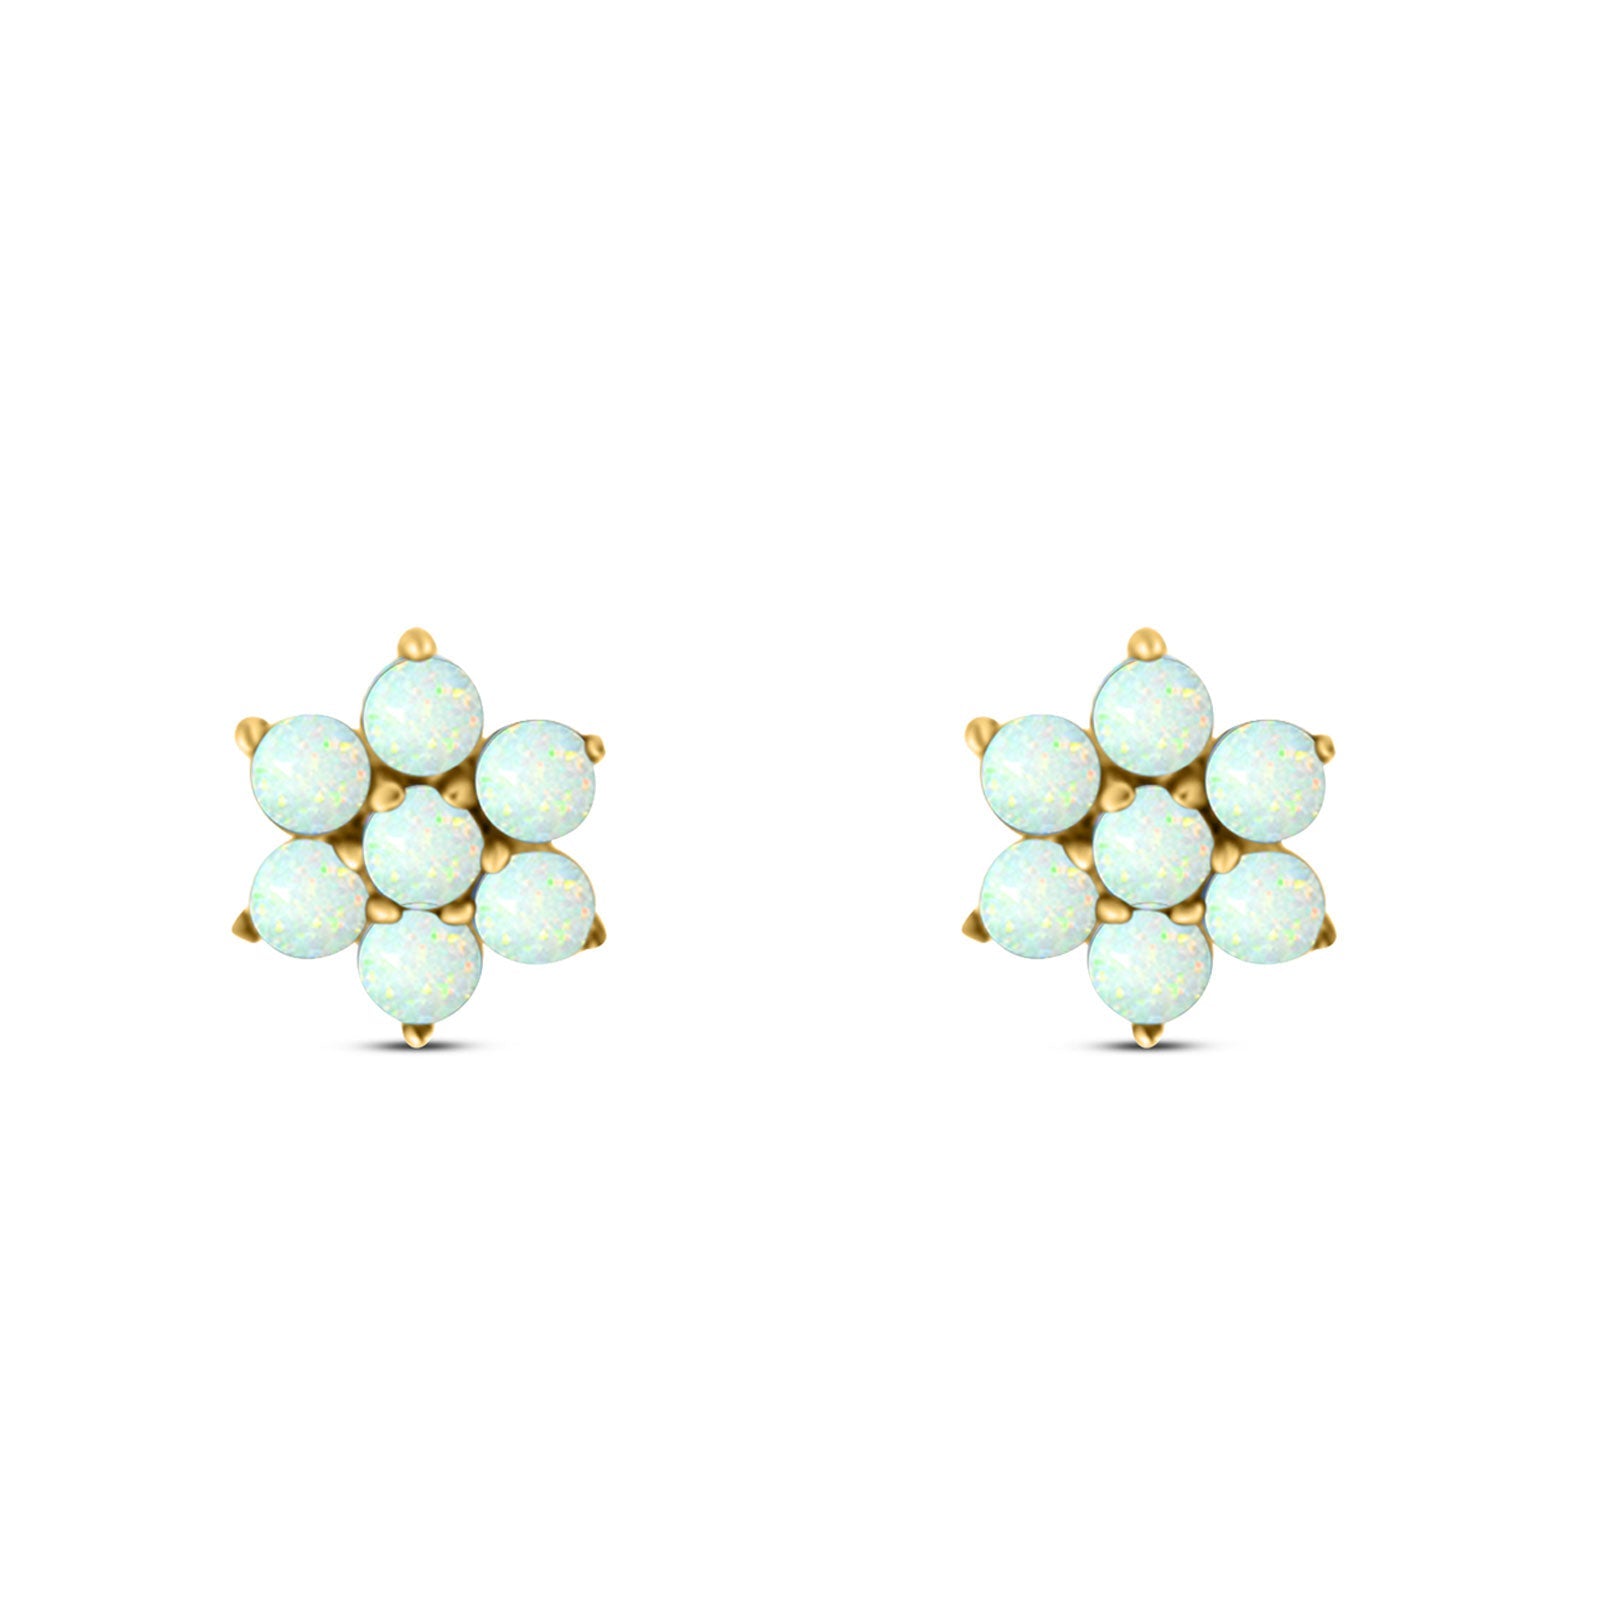 Art Deco Round Flower Design Stud Earring Created Opal Solid 925 Sterling Silver (6.3mm)